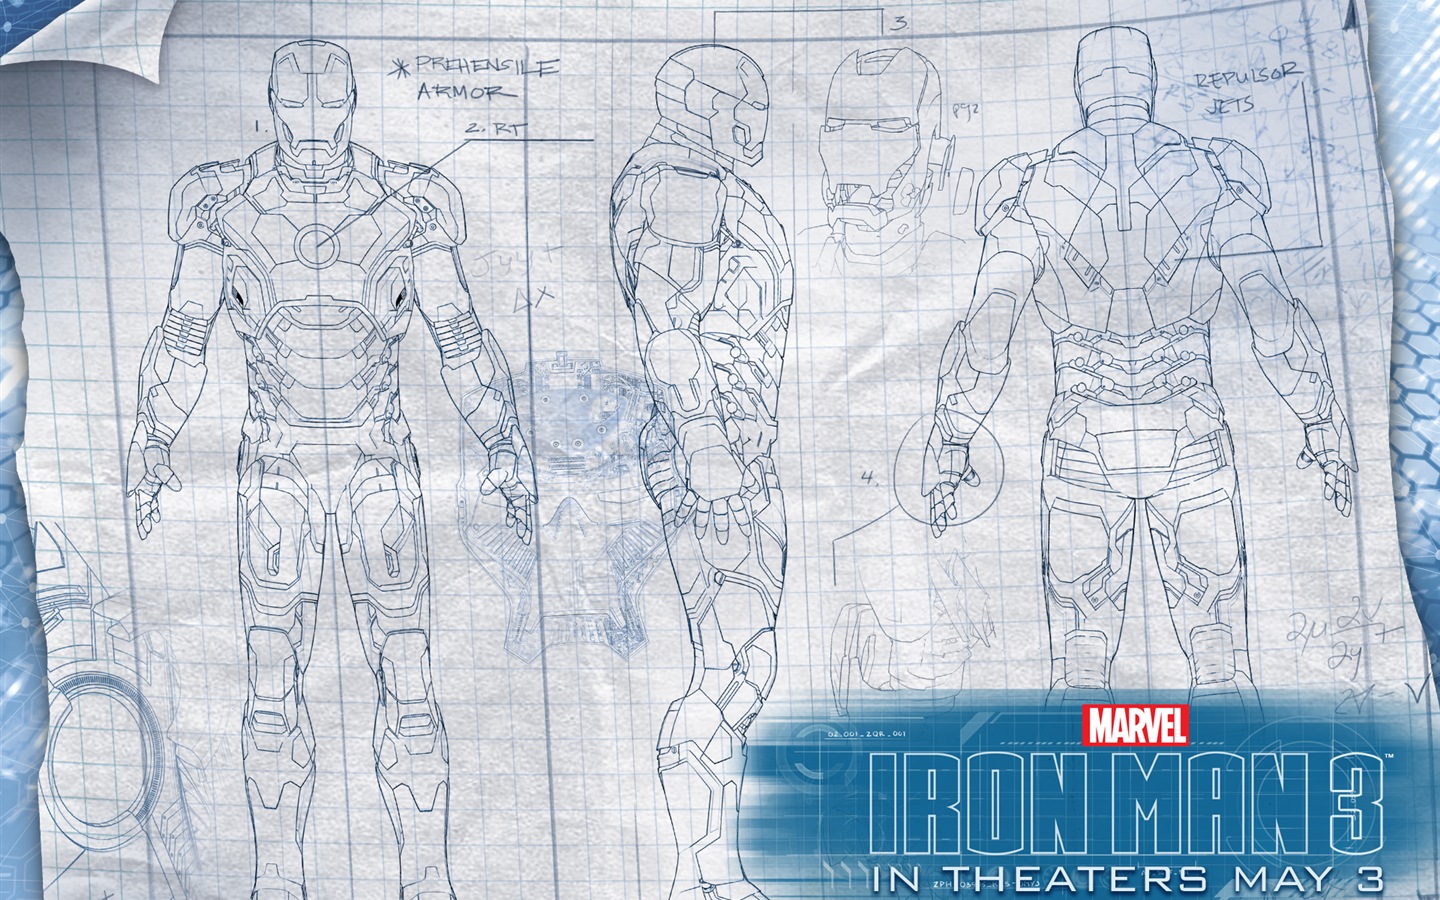 2013 Iron Man 3 newest HD wallpapers #8 - 1440x900